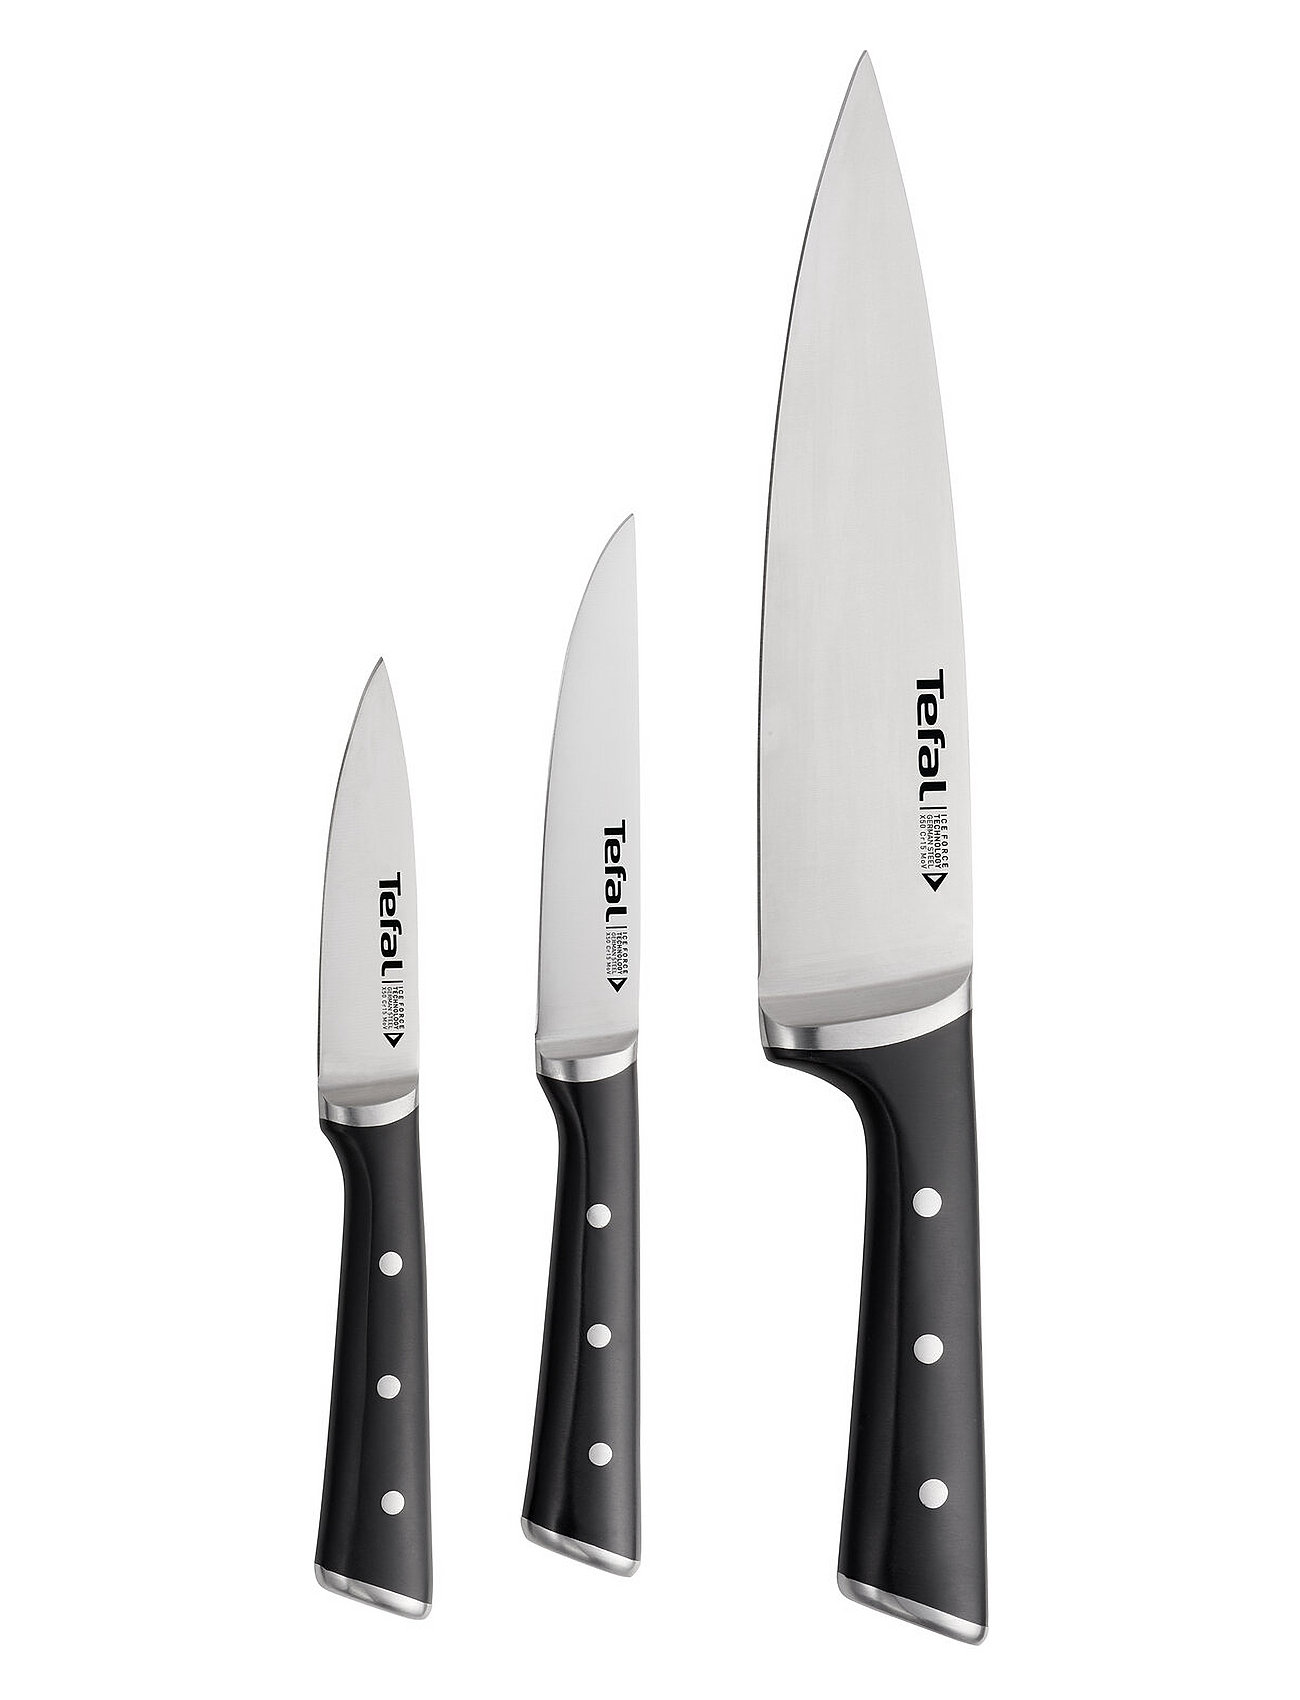 kitchen Knife Ice knife Utility-, Chef accessories & – 3pcs – Pairing-, Set Force Tefal knives